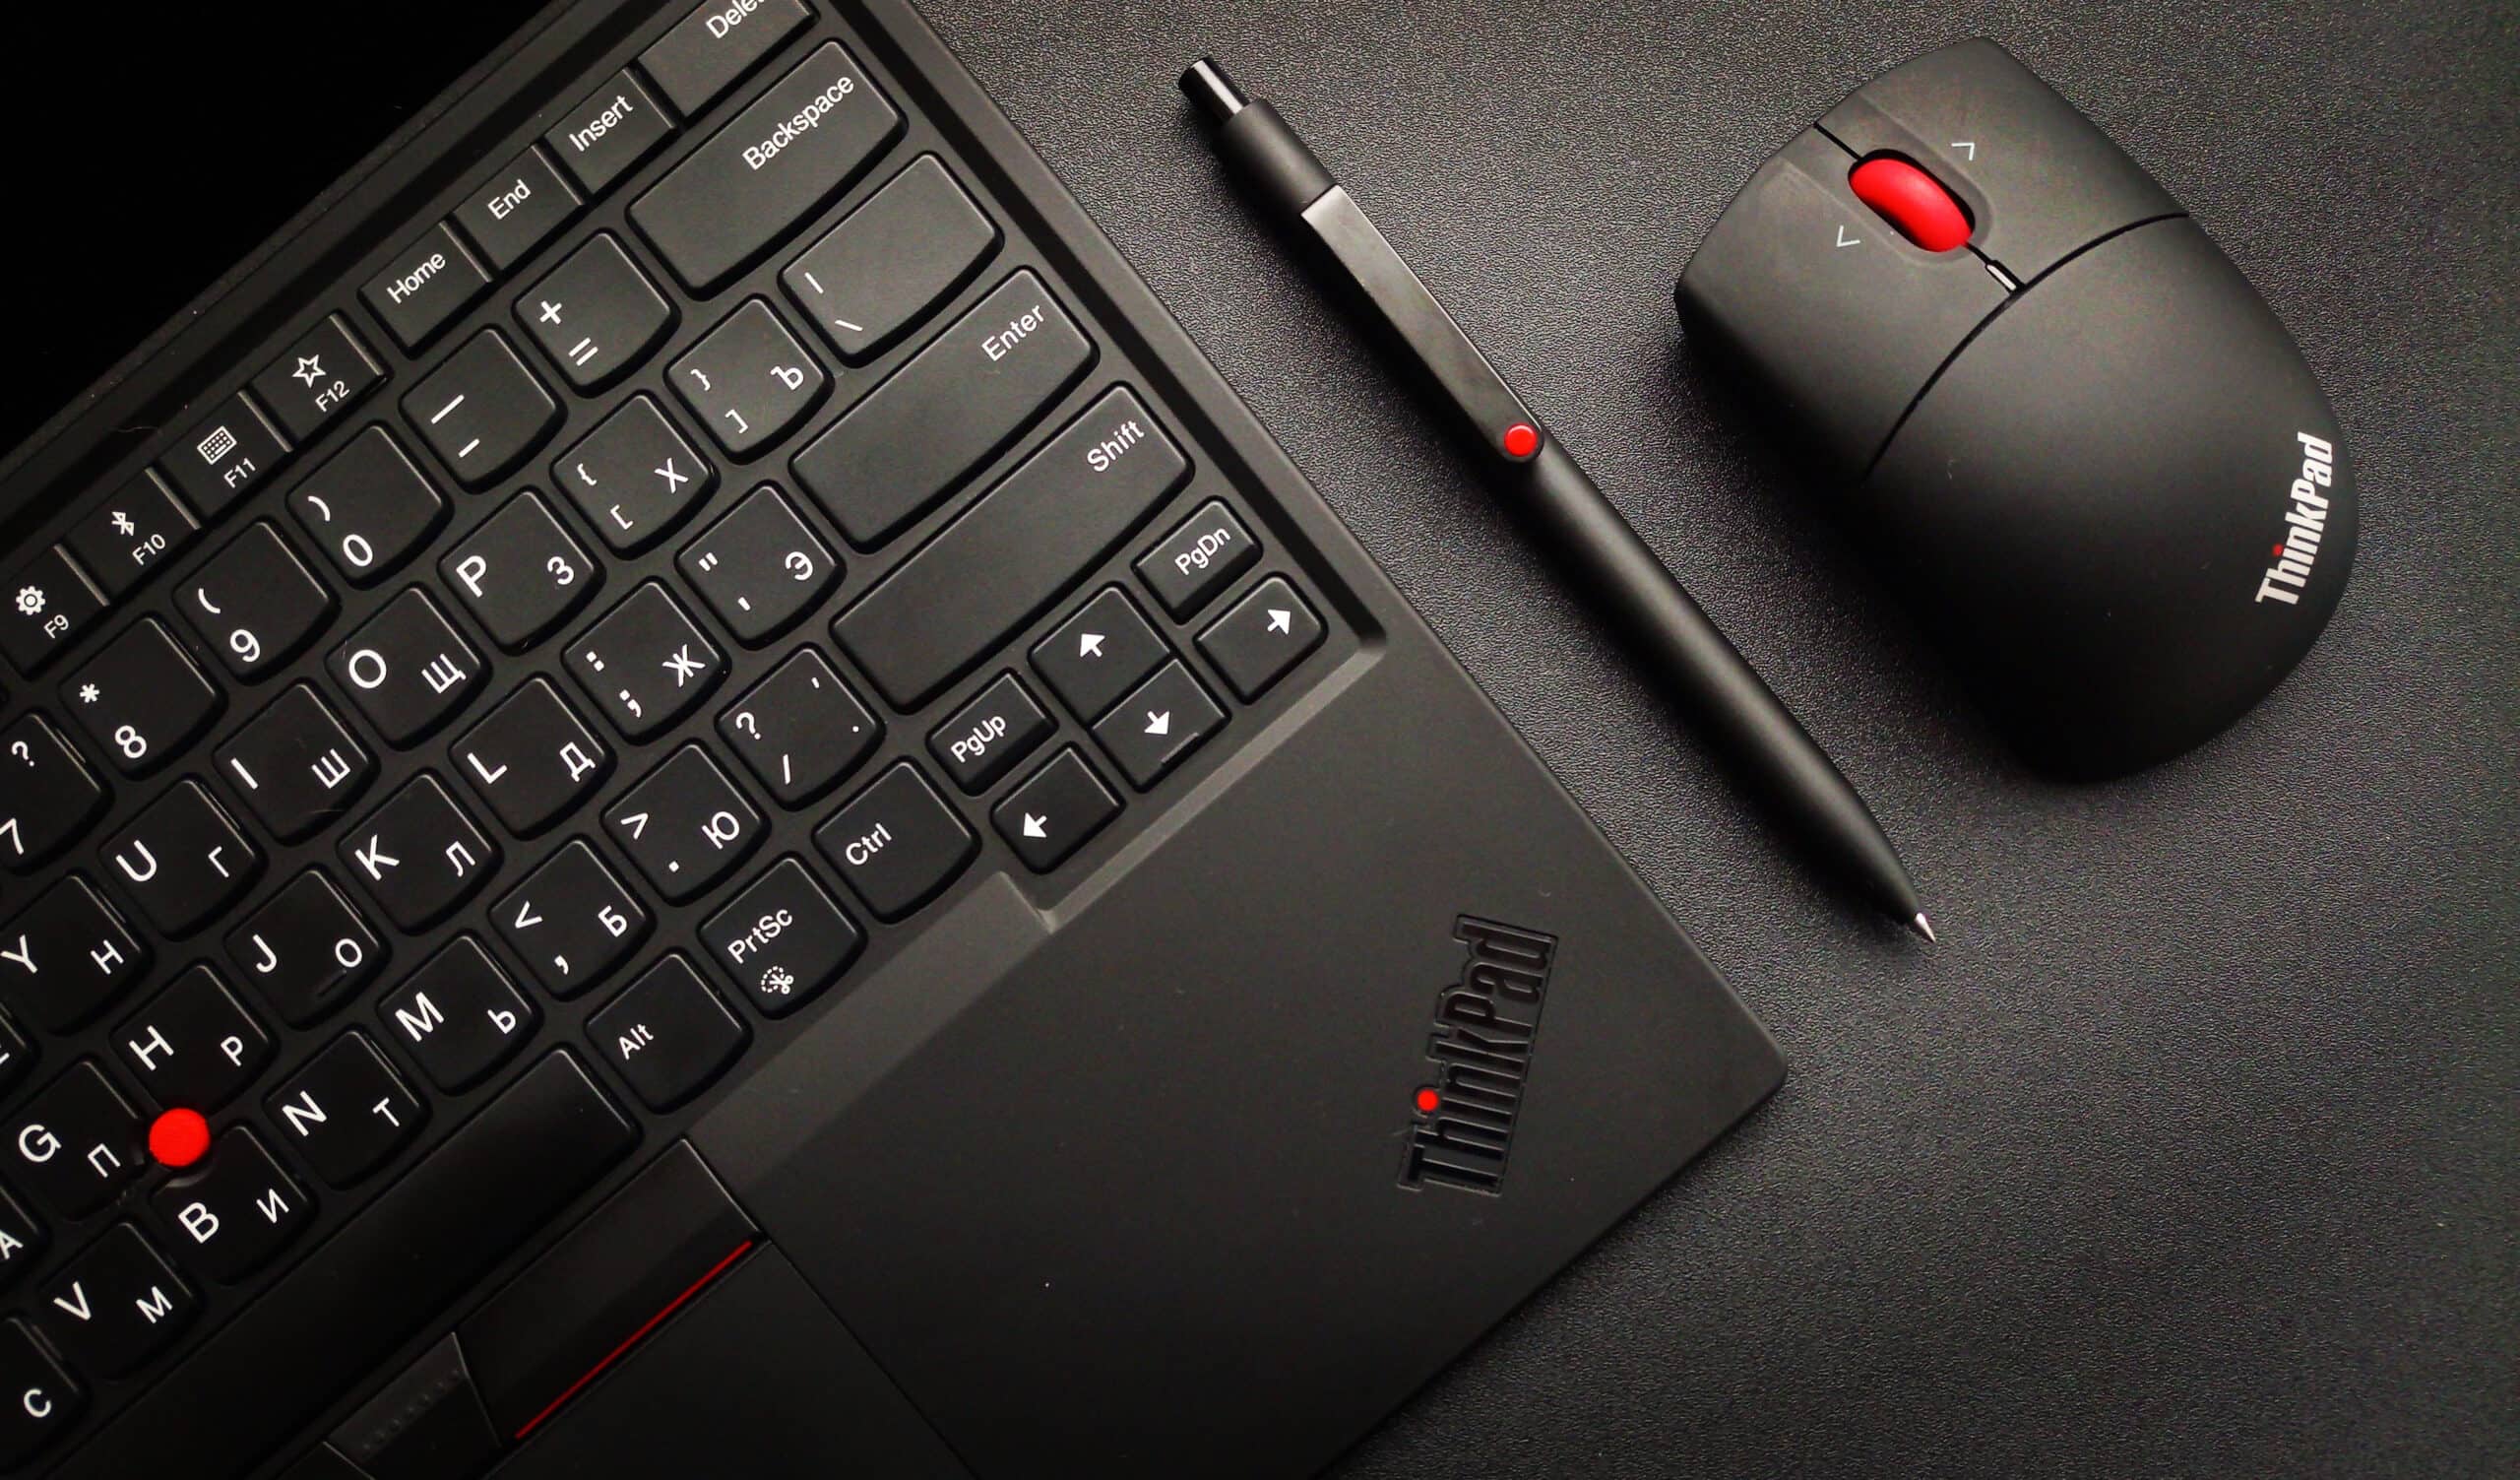 The Complete History of the ThinkPad: Launch, Models, Pricing, and 